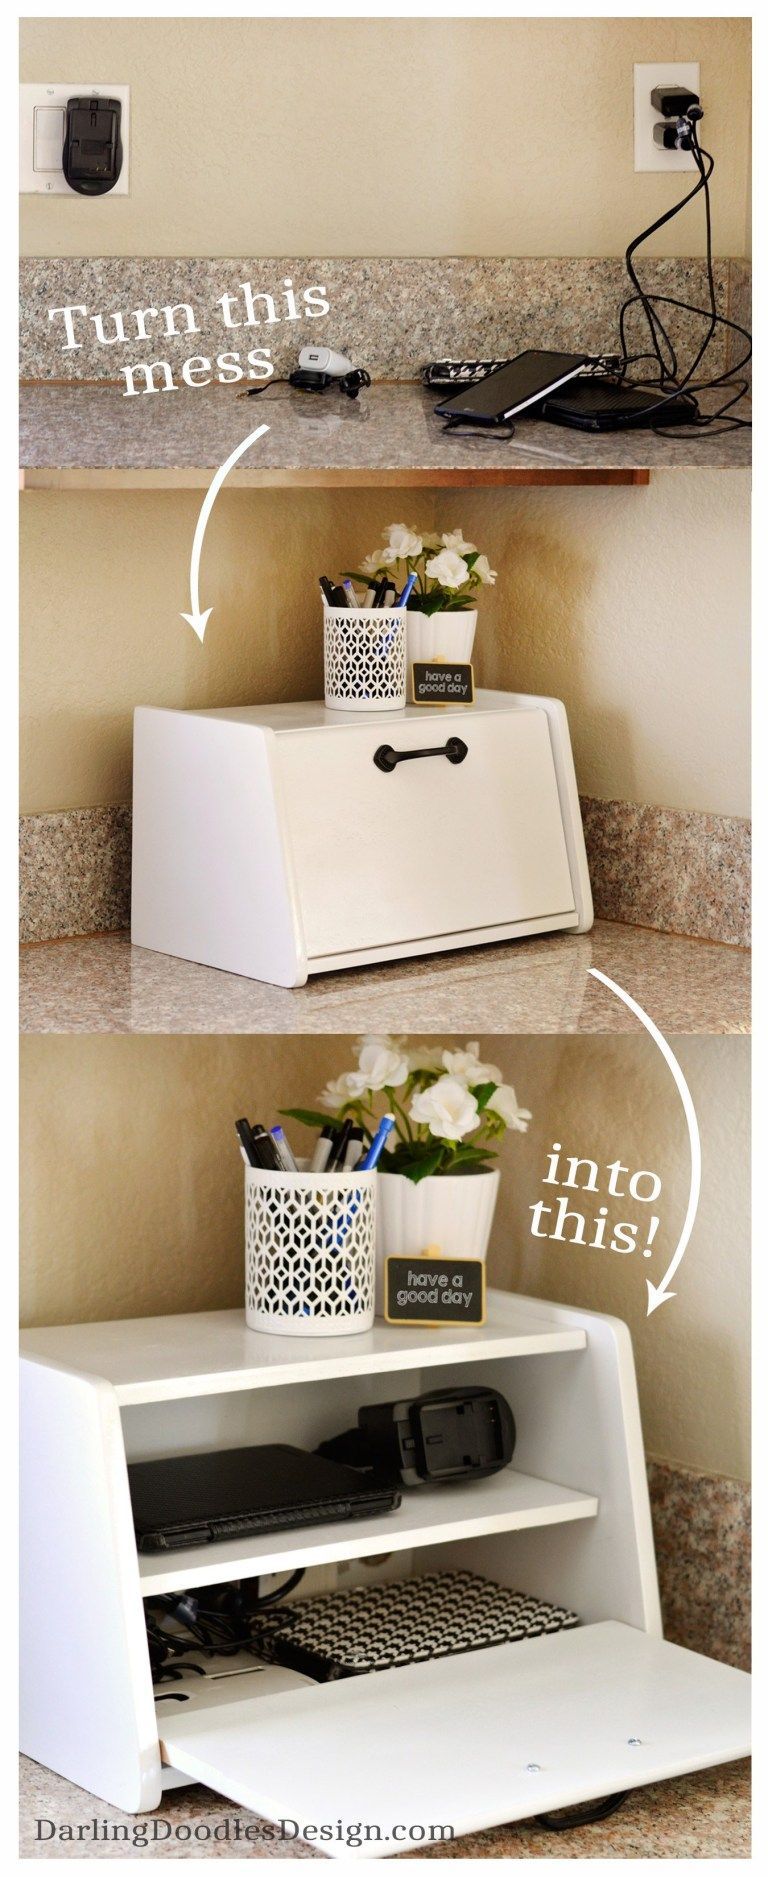 DIY Charging Station With An Old Bread Box - Darling Doodles - DIY Charging Station With An Old Bread Box - Darling Doodles -   18 diy Ideen organisation ideas